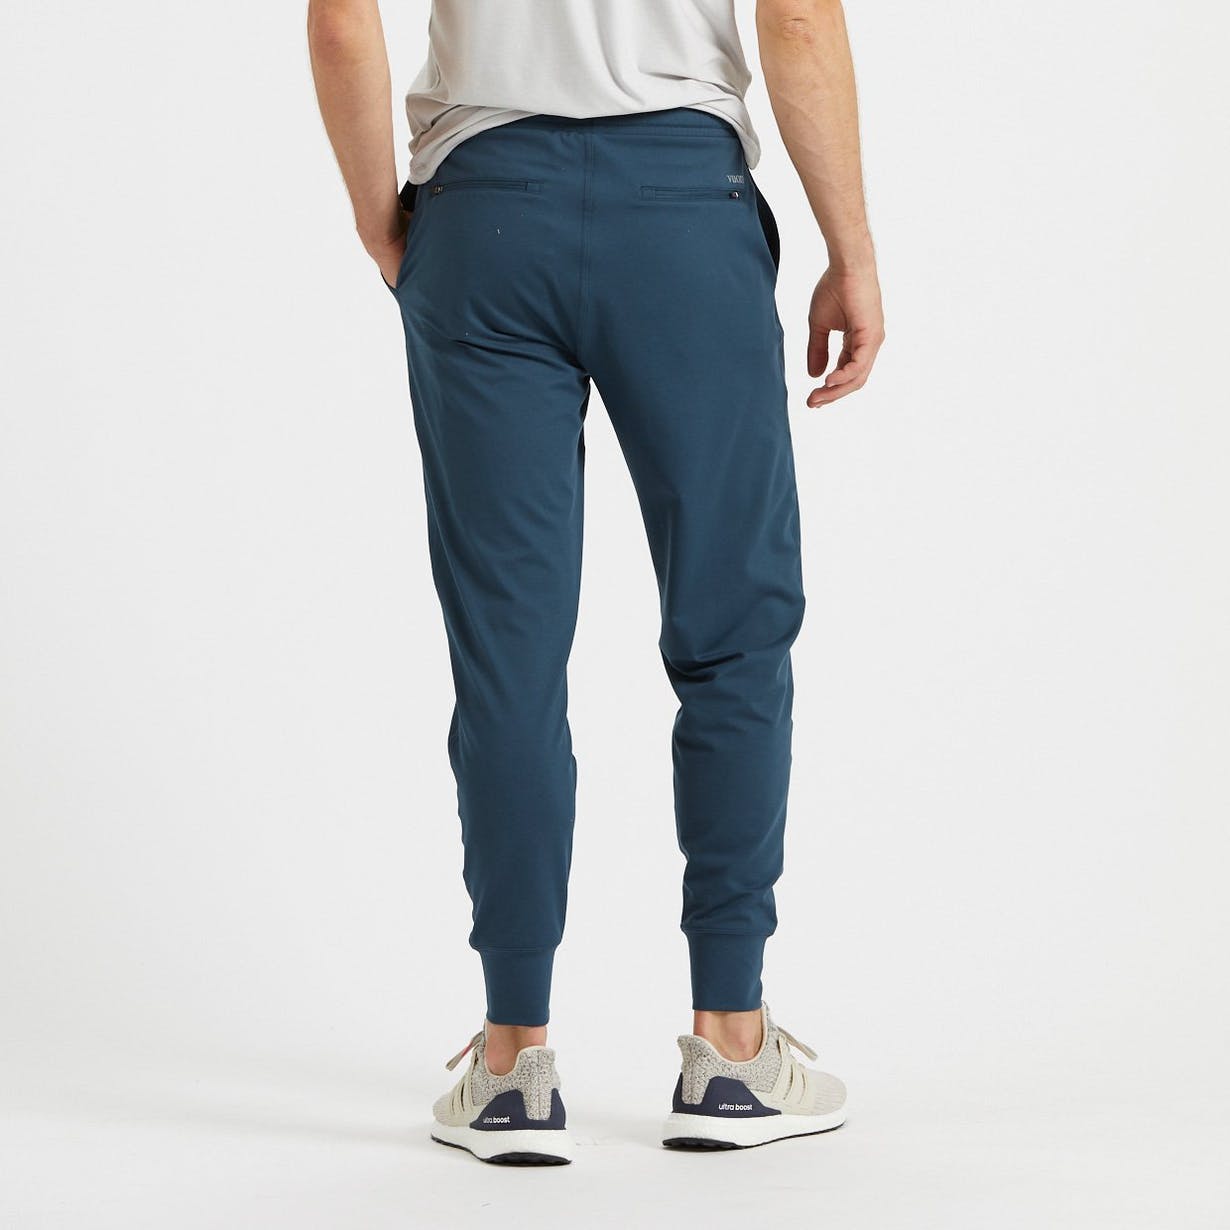 homines jogger 4